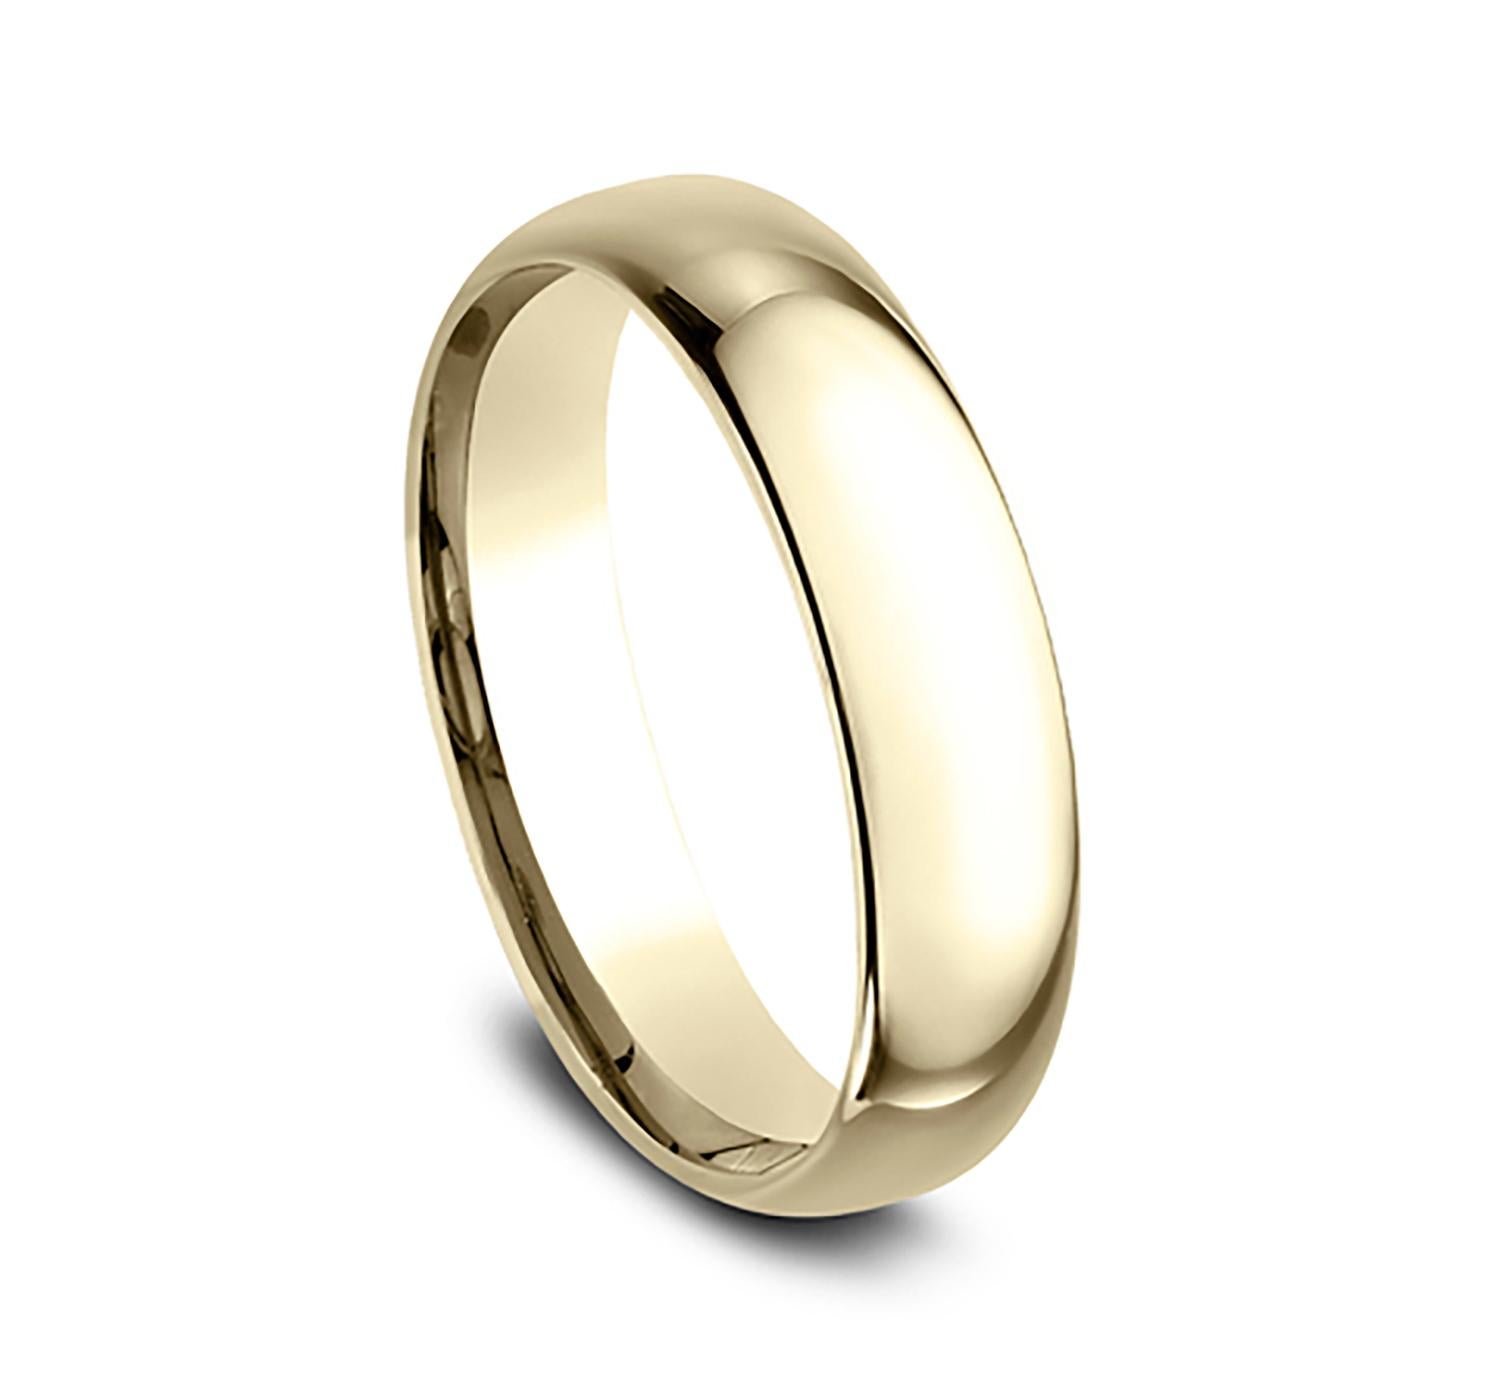 Benchmark wedding band in 14K yellow gold polished finish. Width 5mm, high dome comfort fit. Custom engraving and finishing available. Size 8 US and resizable upon request. Available in 1/4, 1/2, and 3/4 sizes, for more information please message us